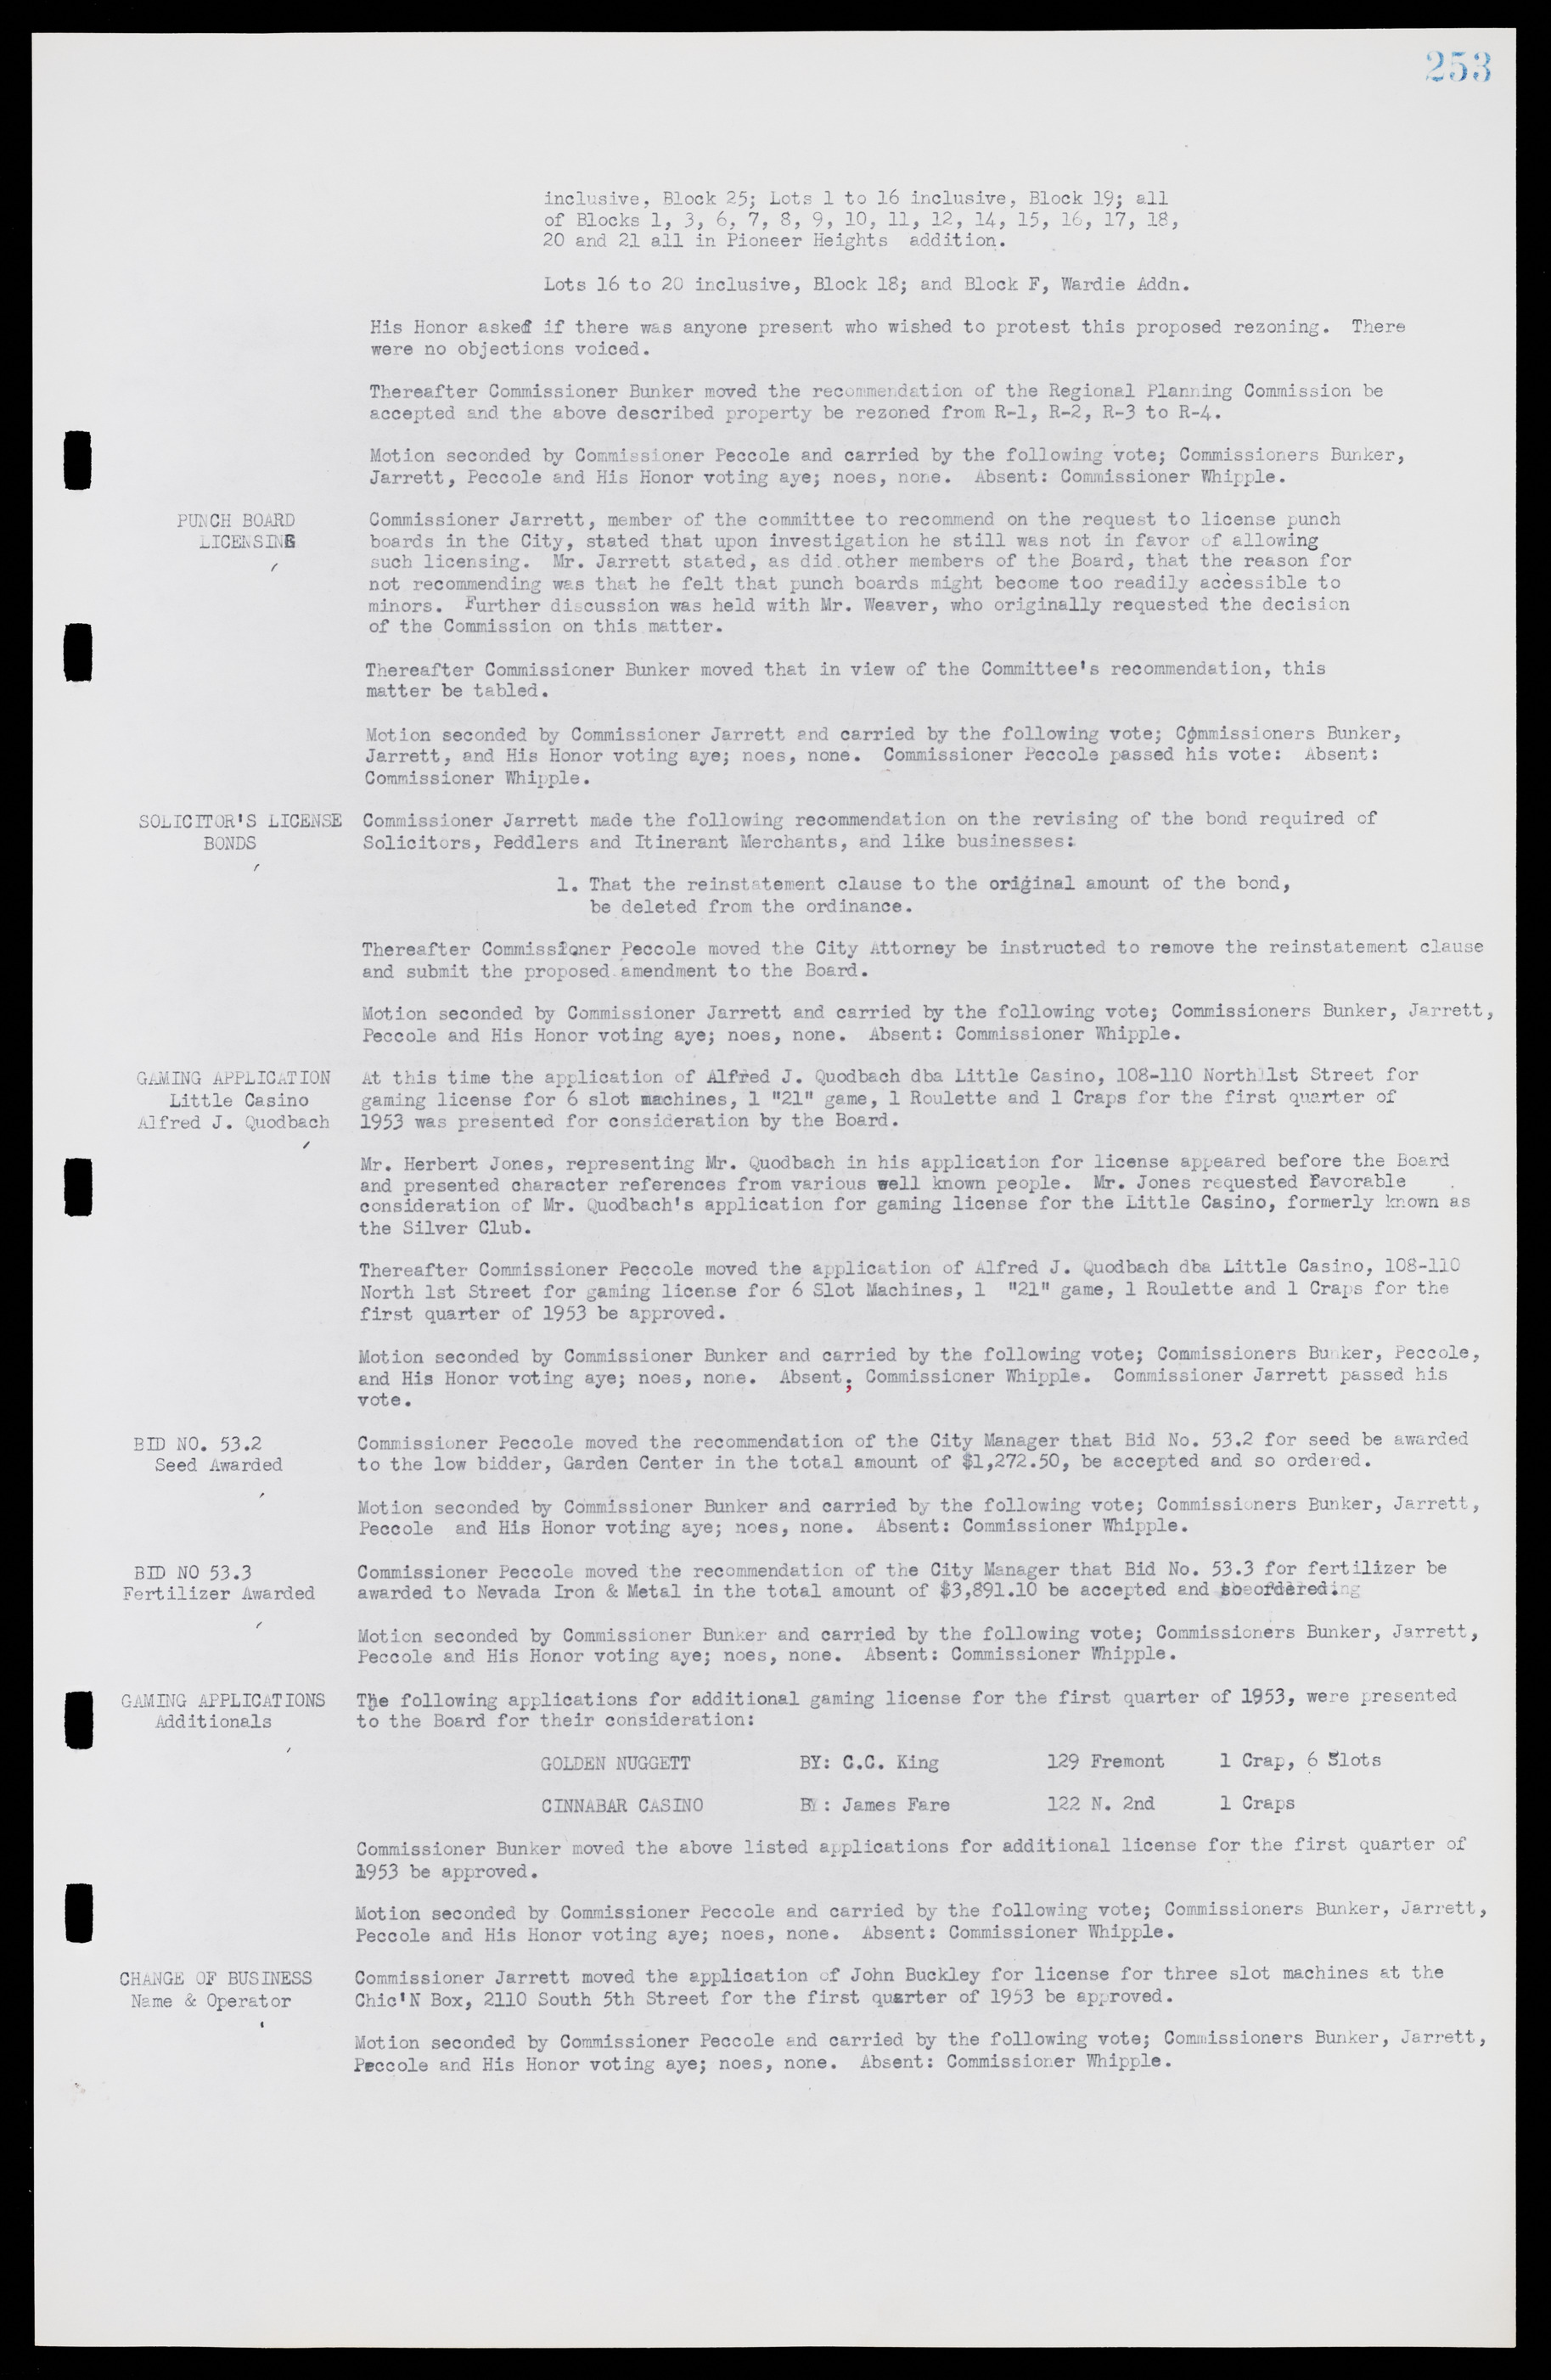 Las Vegas City Commission Minutes, May 26, 1952 to February 17, 1954, lvc000008-269